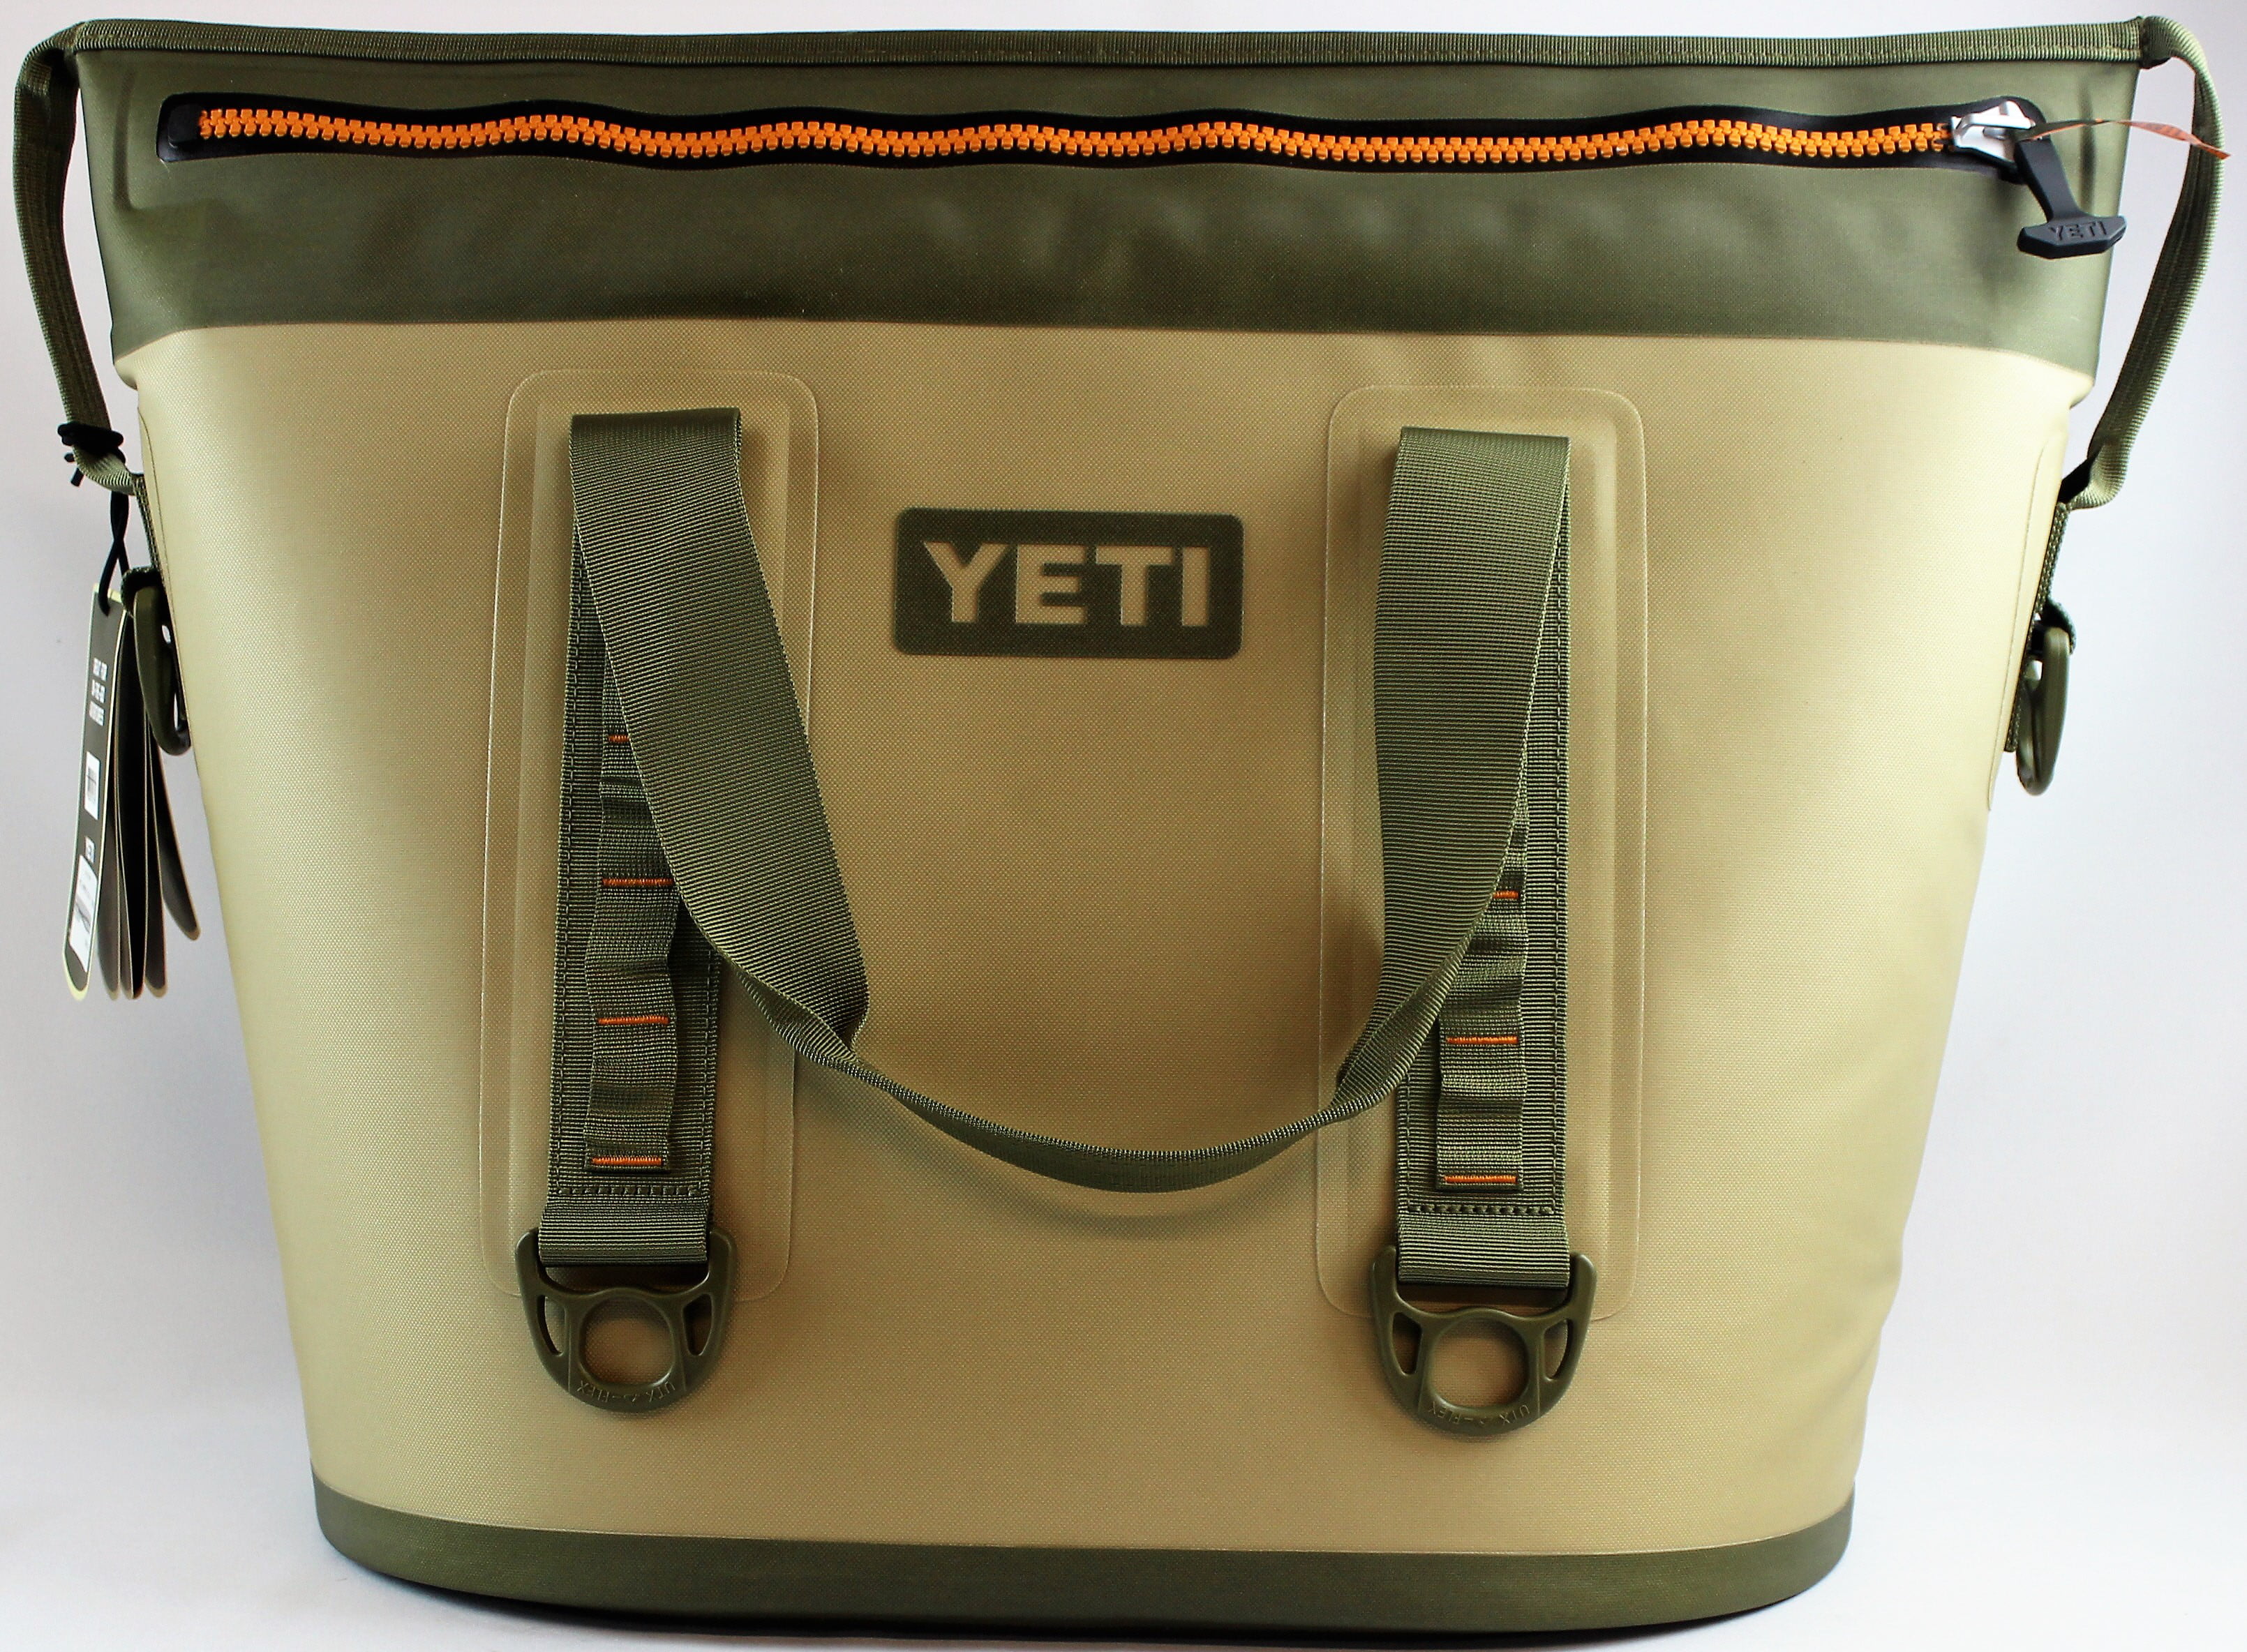 YETI's Hopper 40 Cooler carries 36 cans and keeps it cold all day